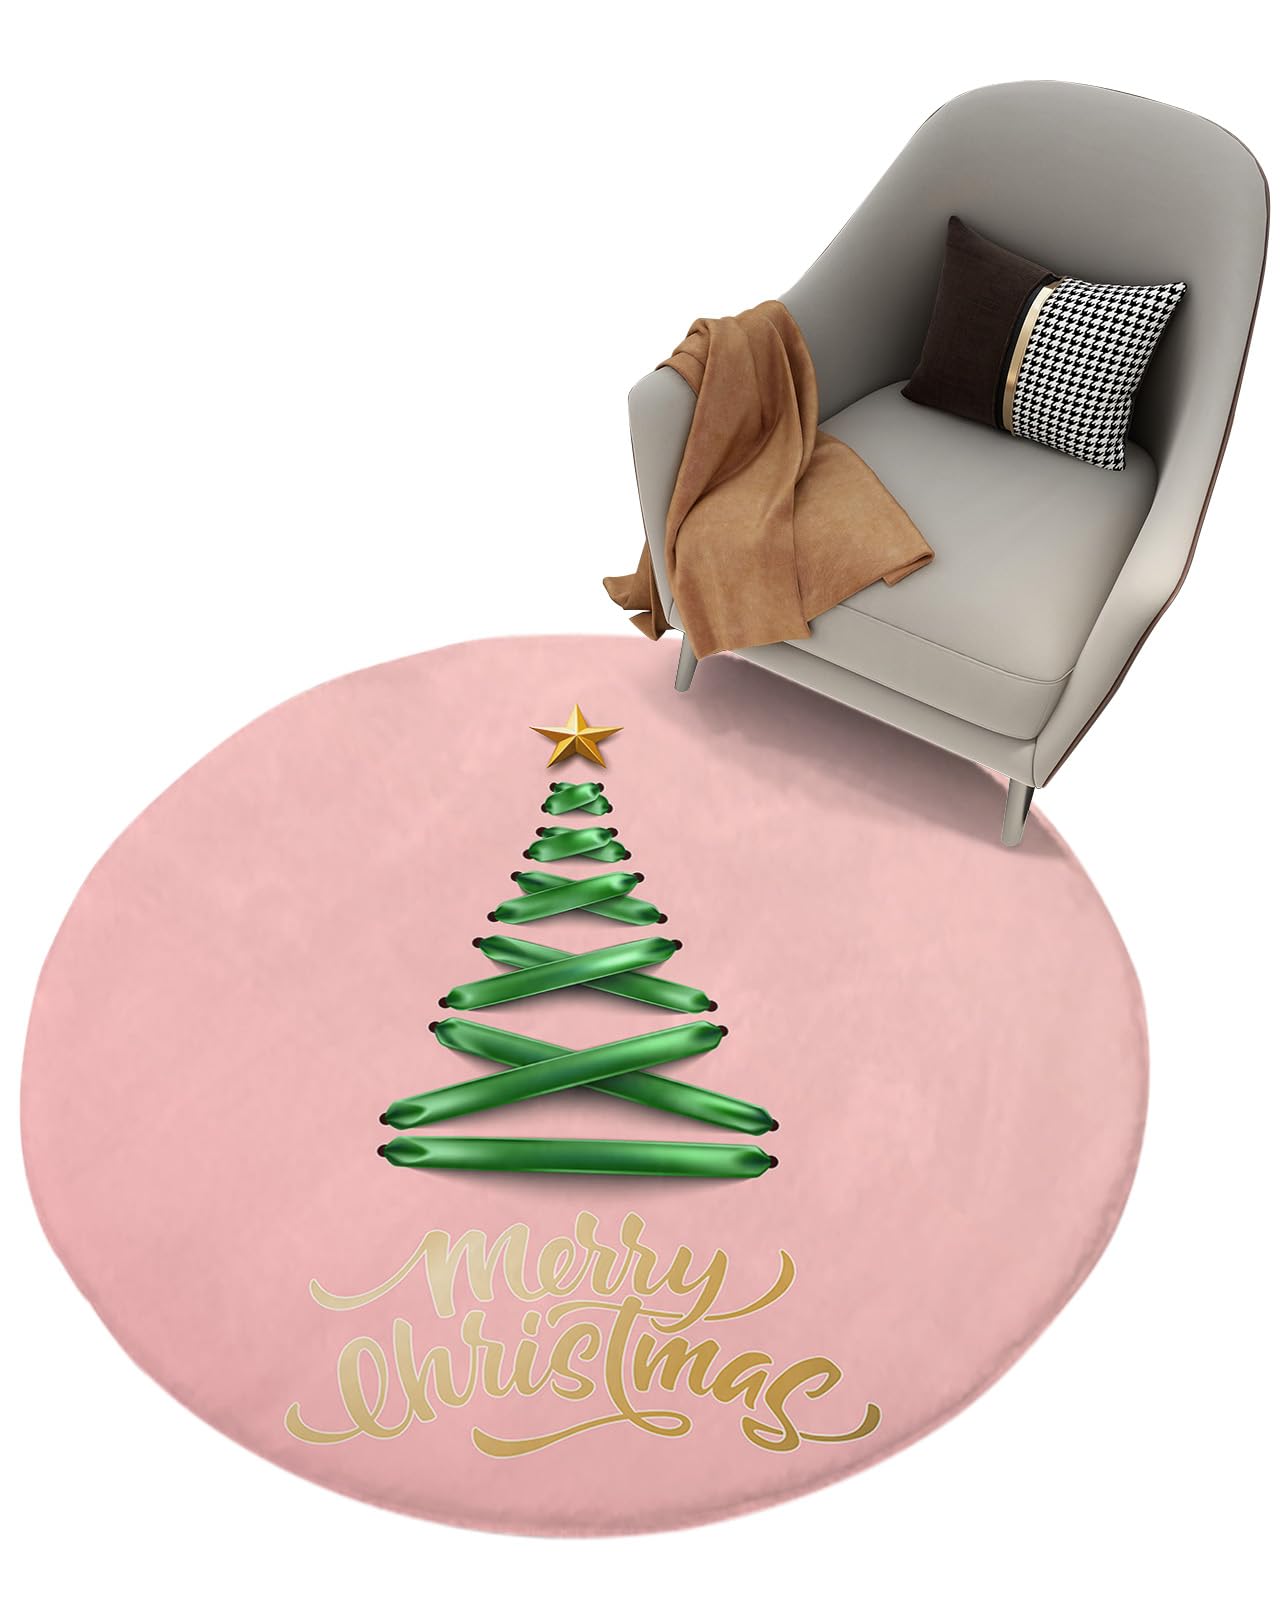 Christmas Fluffy Round Area Rug Carpets 5ft,Plush Shaggy Carpet Soft Circular Rugs,Non-Slip Fuzzy Accent Floor Mat for Living Room Bedroom Nursery Home Decor Geometric Abstract Contemporary Tree Pink